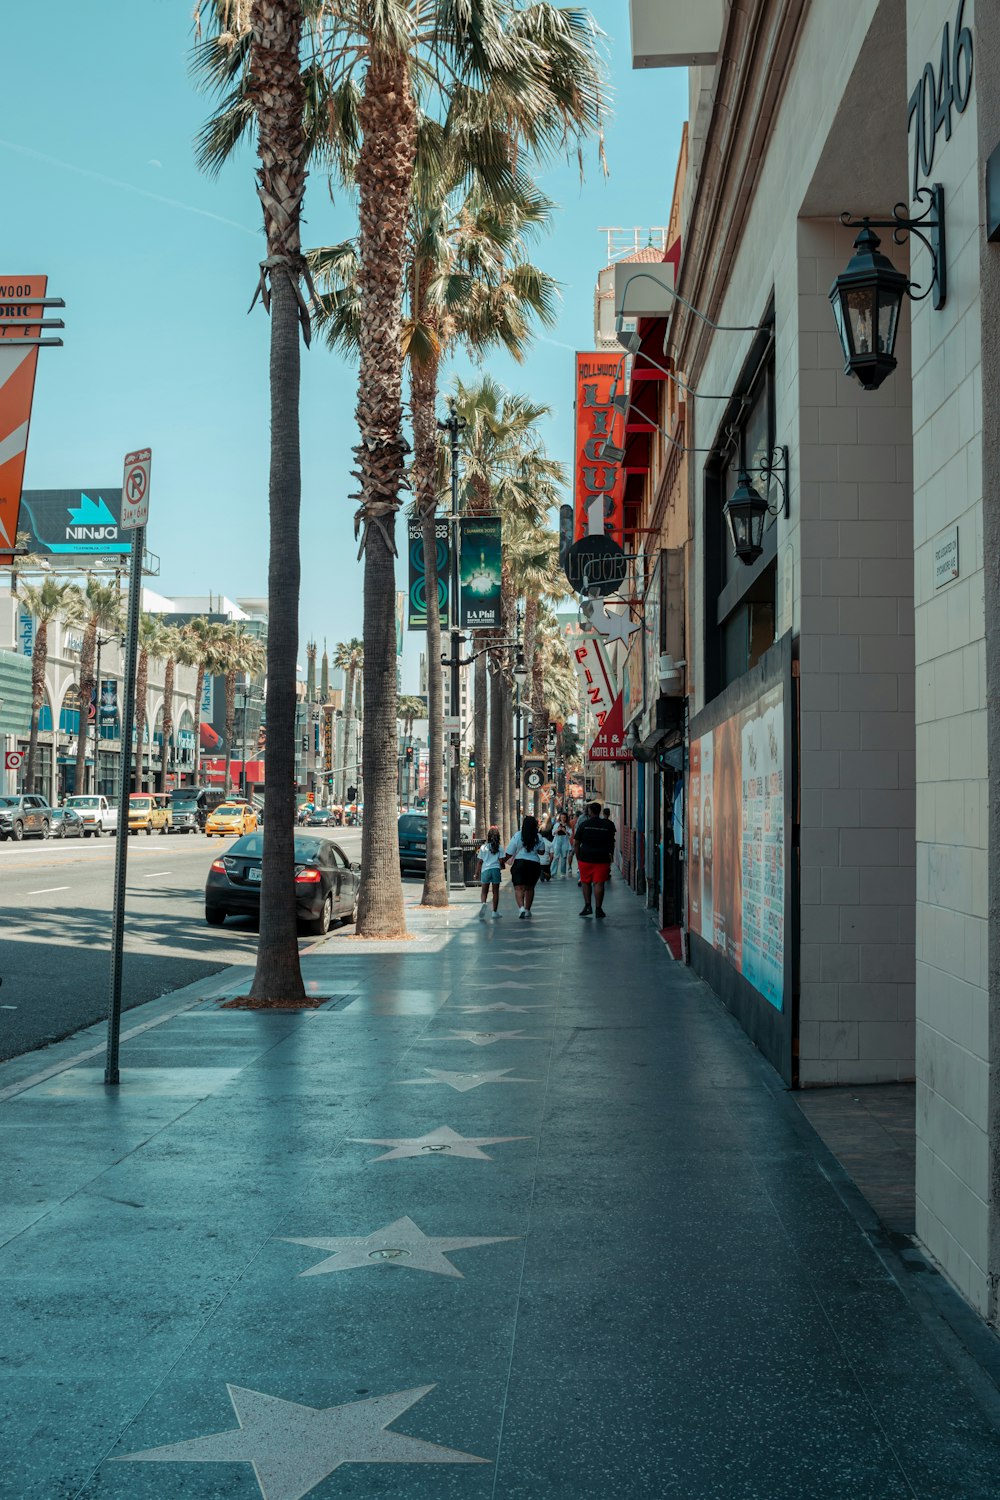 a street with palm trees and people walking on it